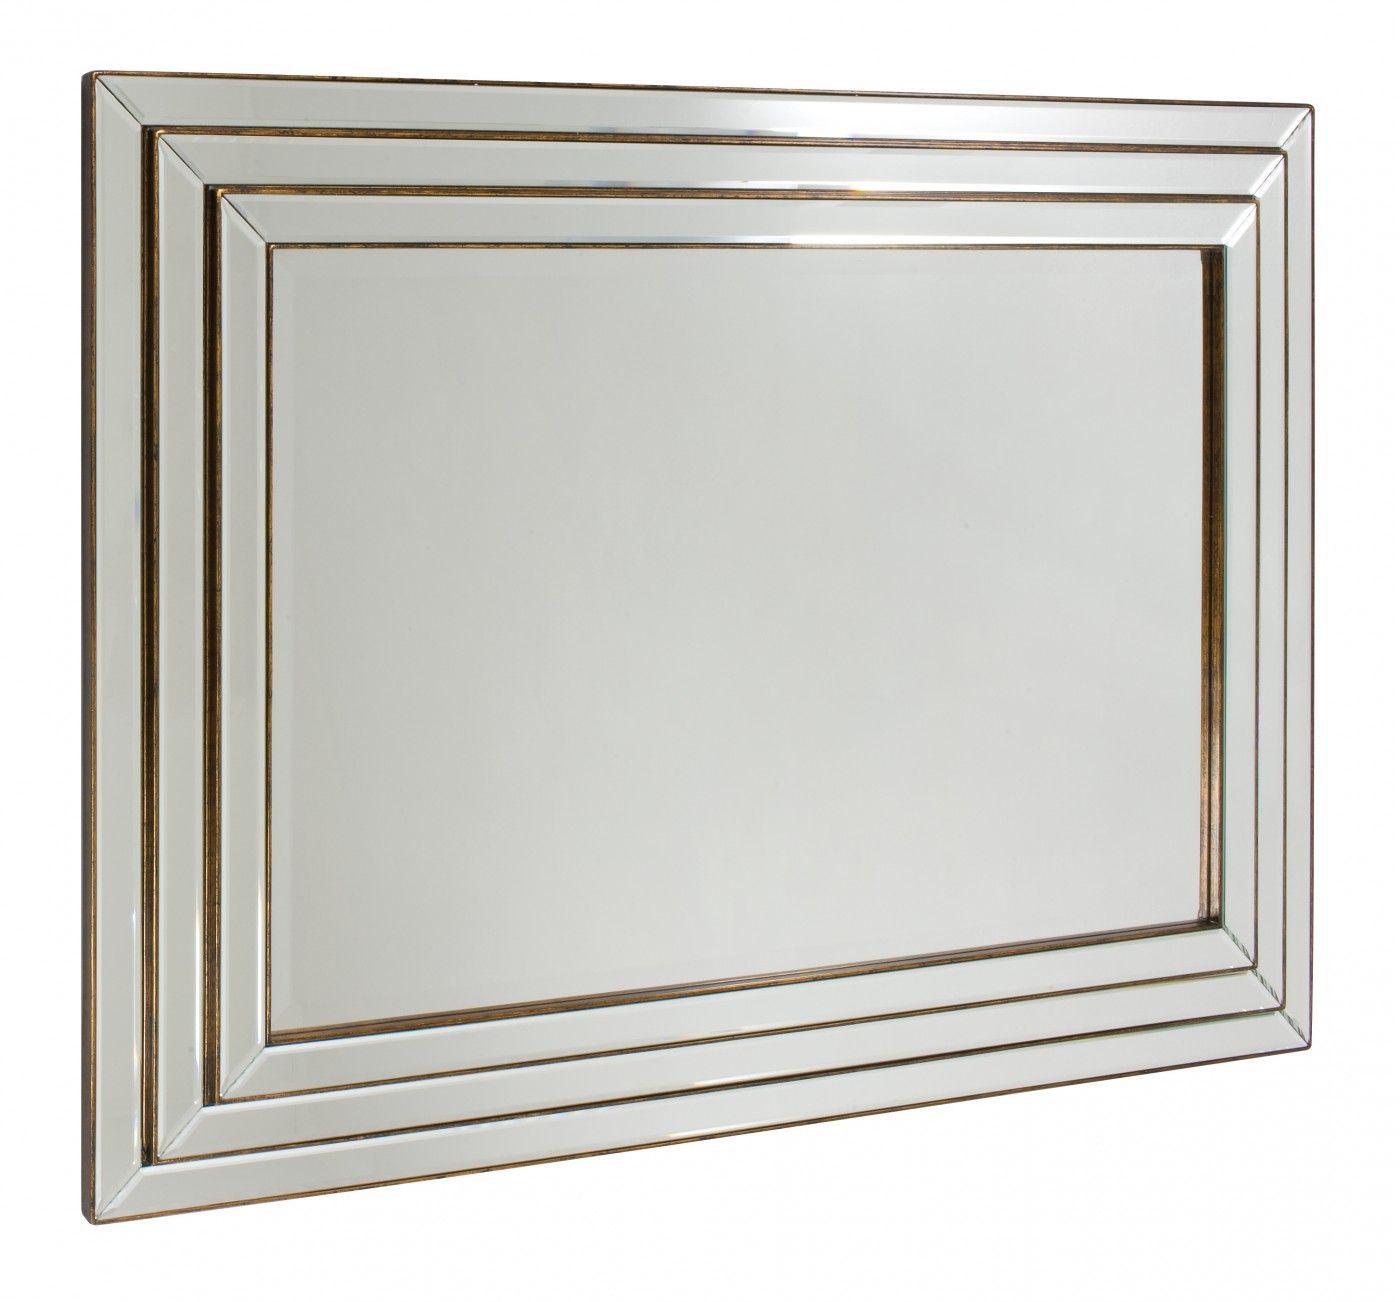 Chantel Wall Mirror Bronze In 2019 | Rustic Wall Mirrors, Mirror With Regard To Silver And Bronze Wall Mirrors (View 15 of 15)